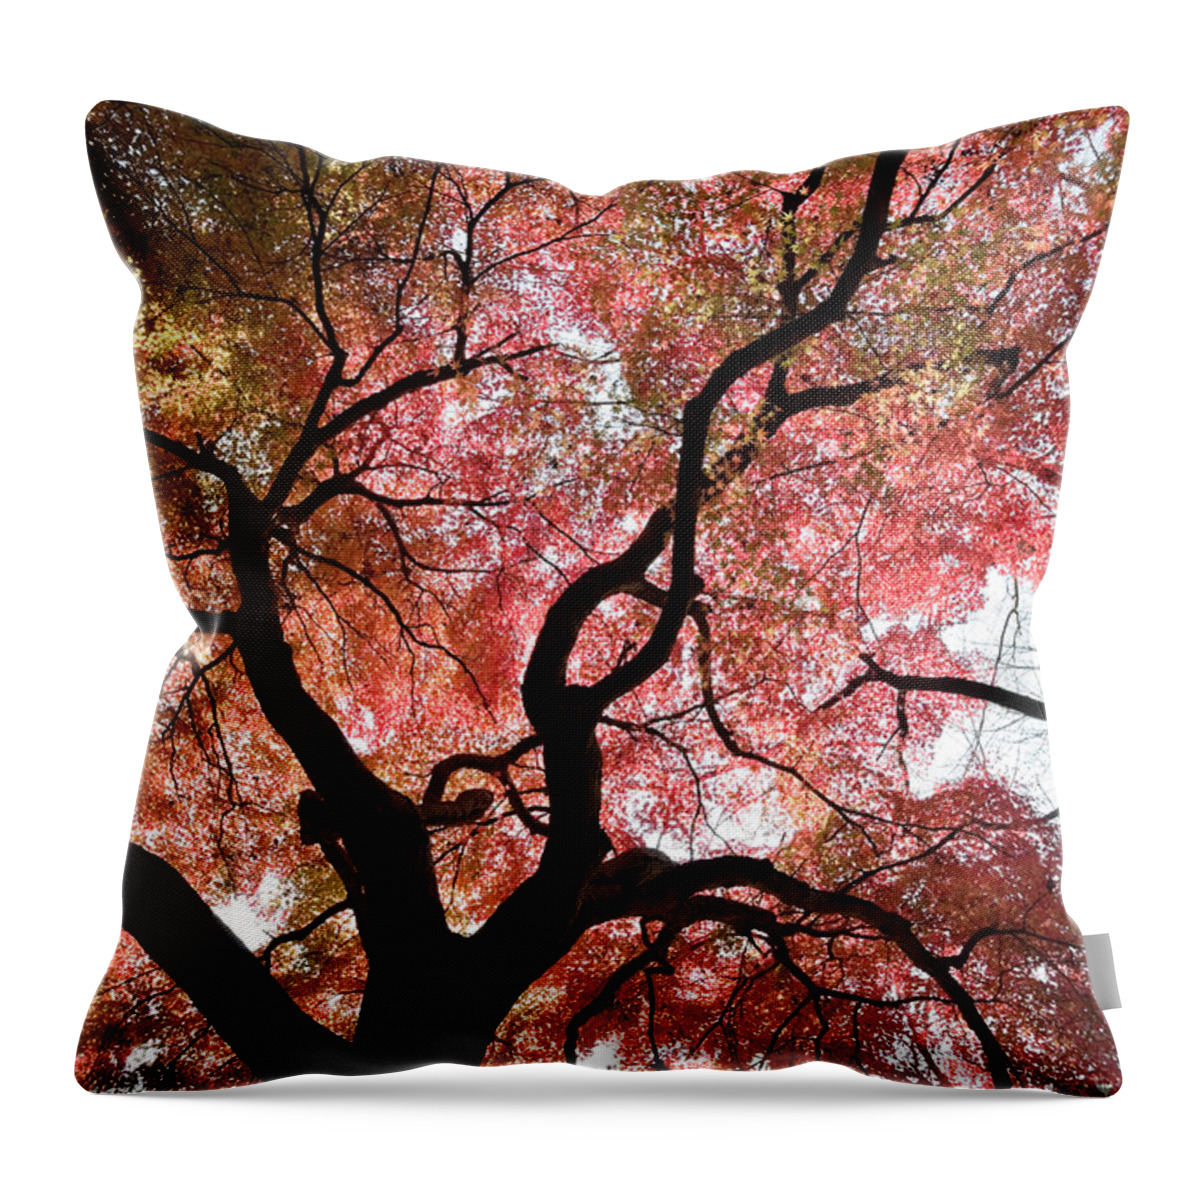 Scenics Throw Pillow featuring the photograph Abstract Autumn Tree by Ooyoo